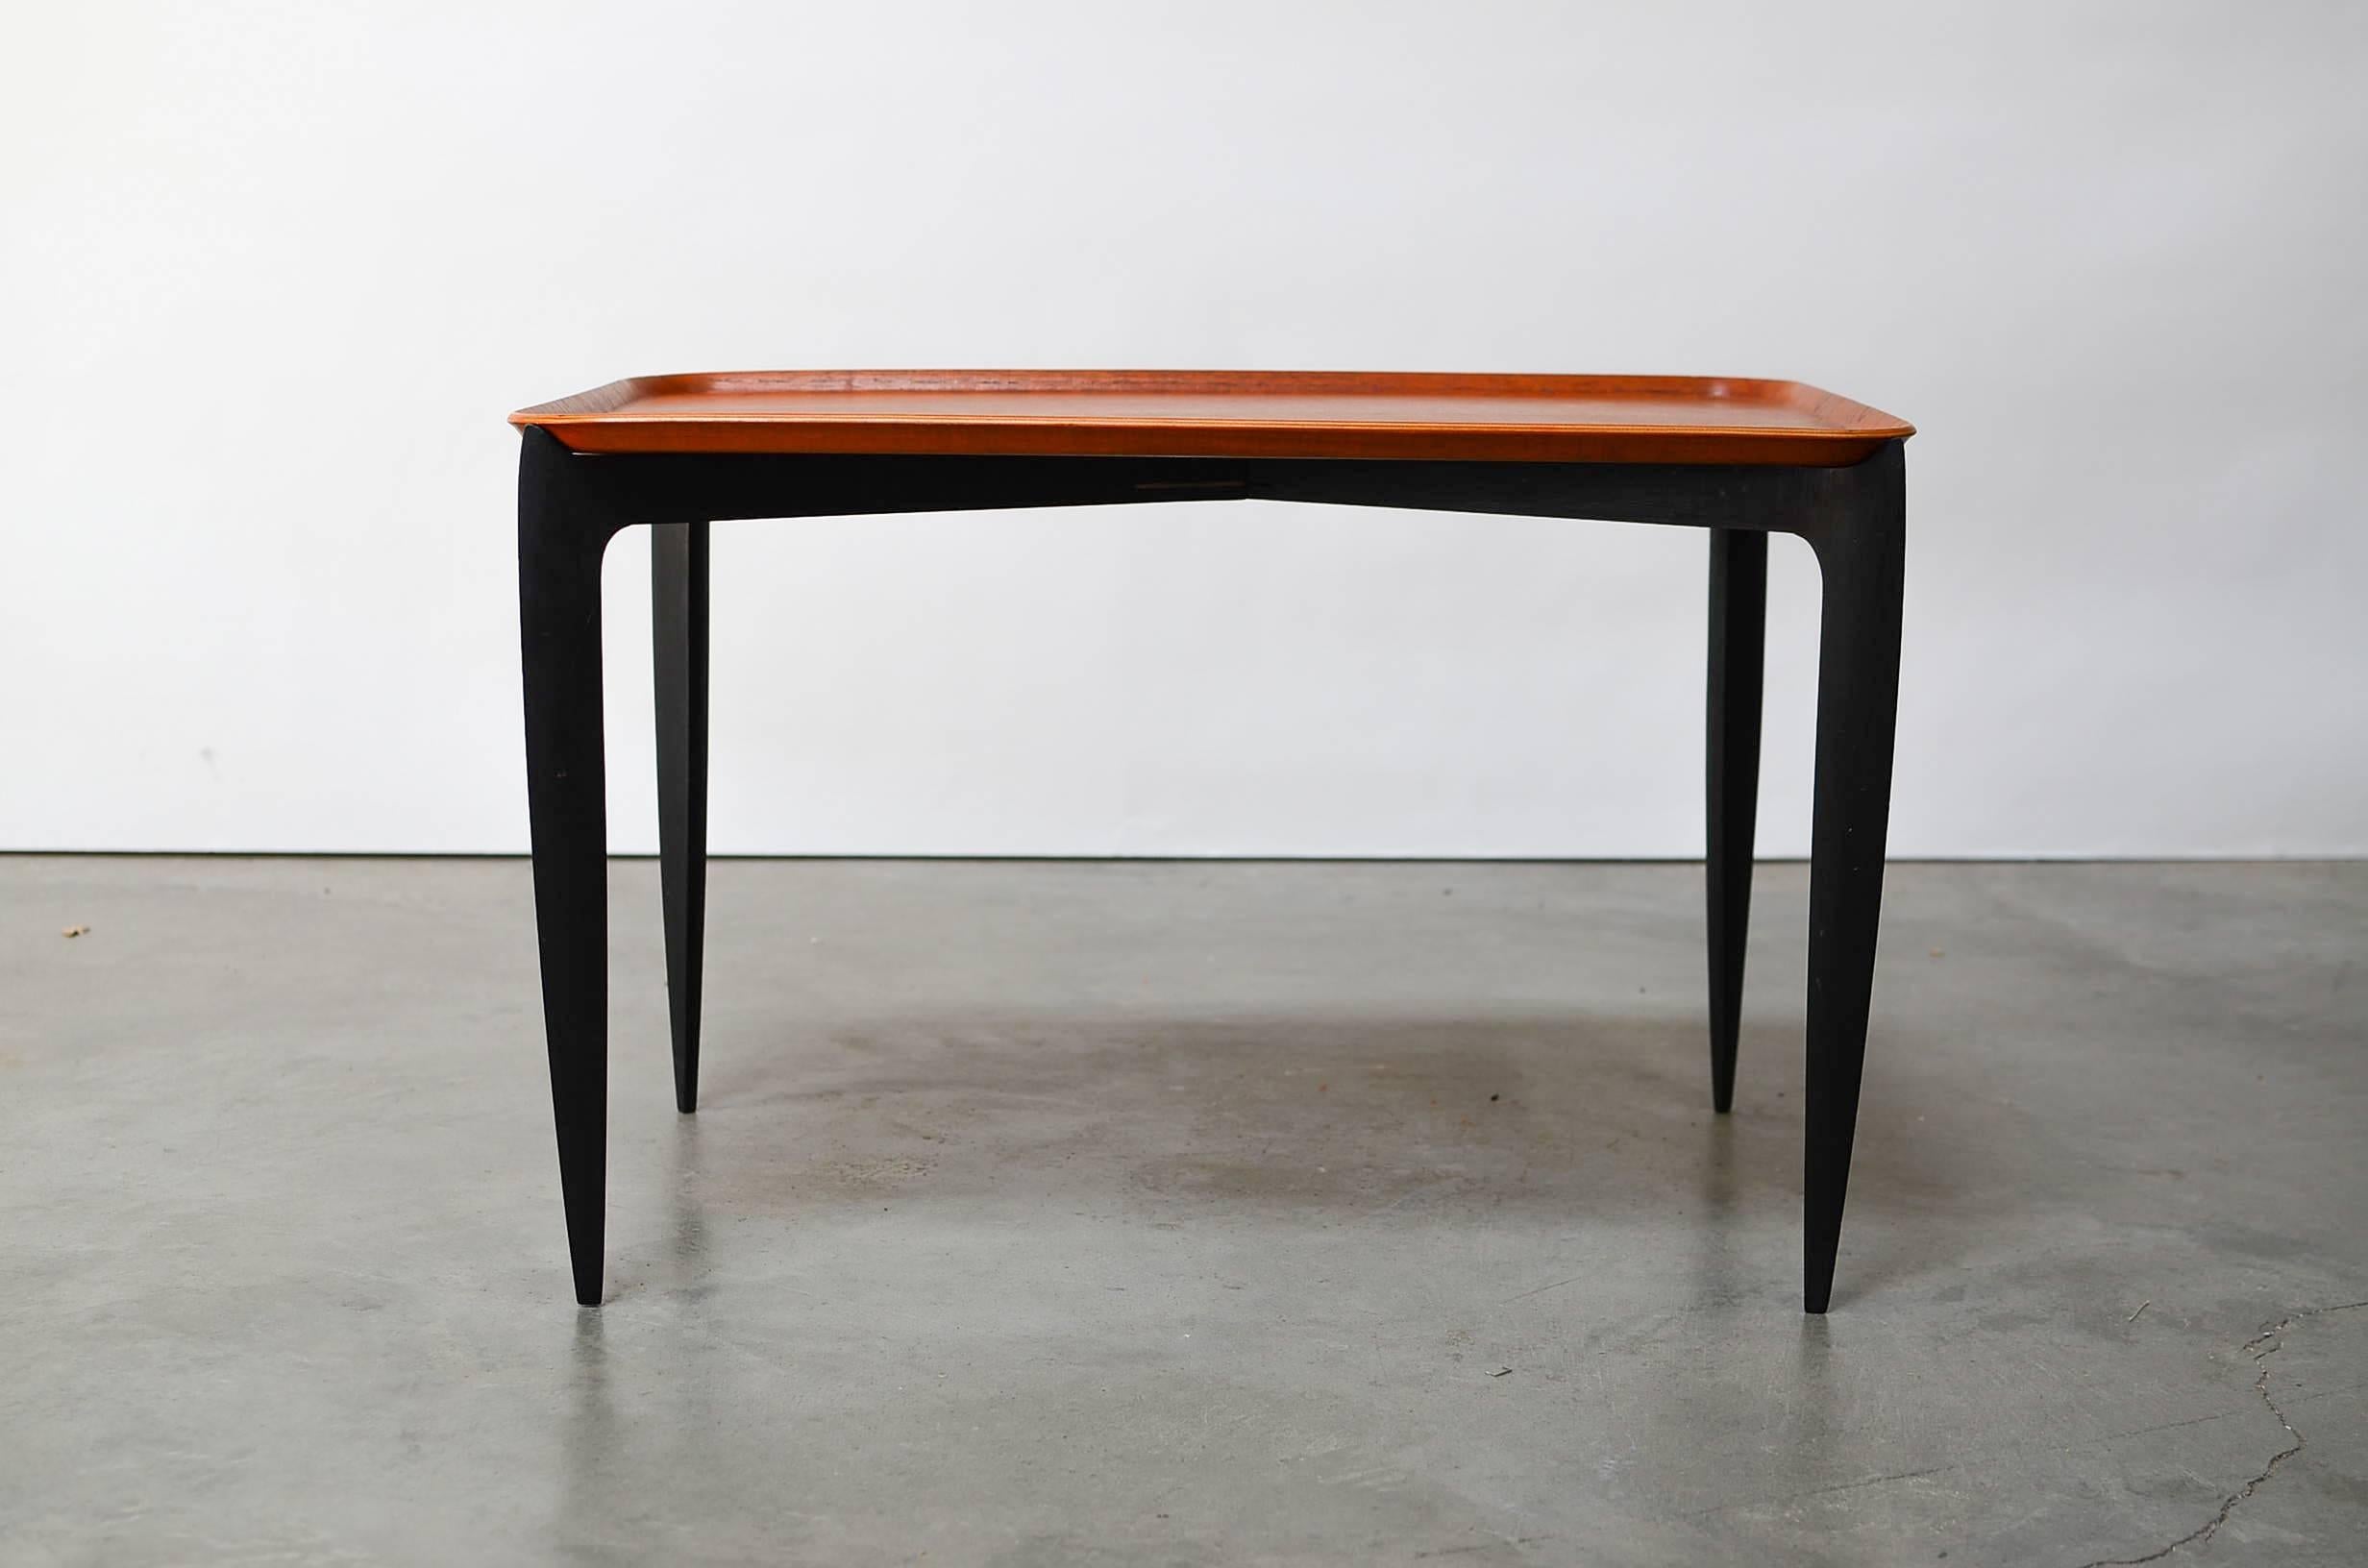 Rare rectangle version tray table designed by Svend Aage Willumsen & H. Engholm and made by Frtiz Hansen. Table folds flat for easy storage when not in use. When open, the sleek tapered black legs support the teak top with a raised lip. Both pieces